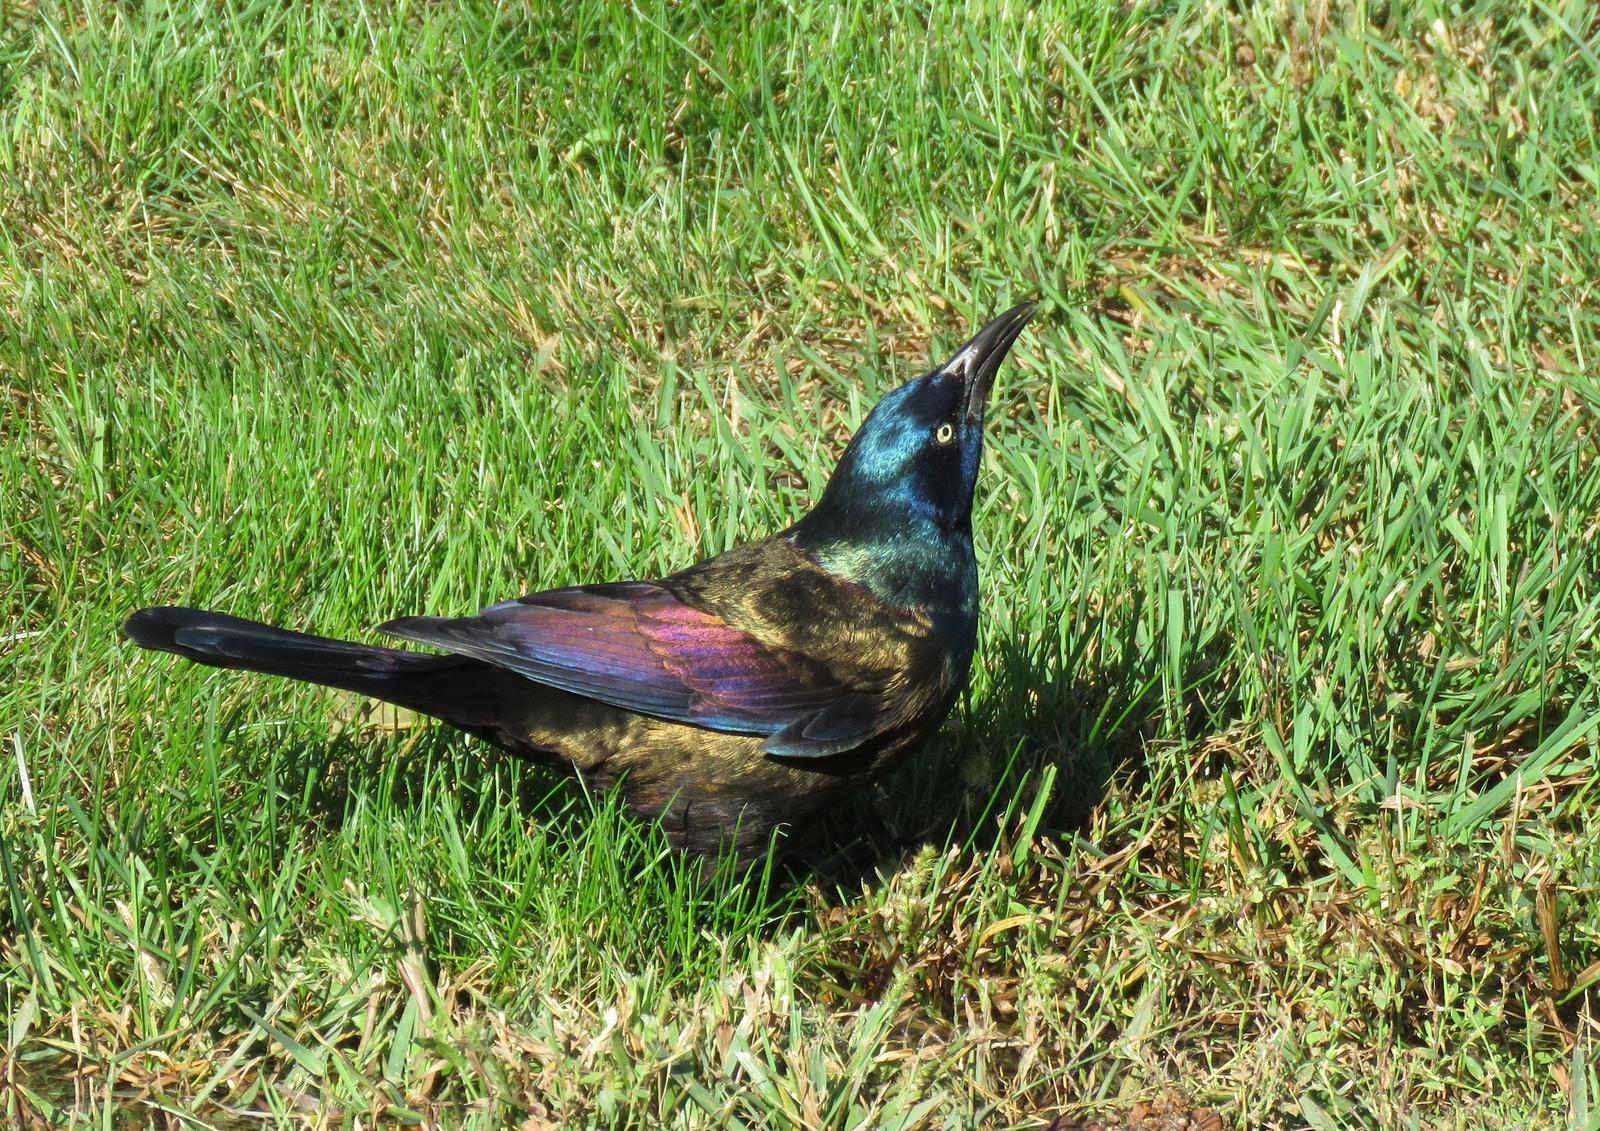 Common Grackle Photo by Kelly Preheim